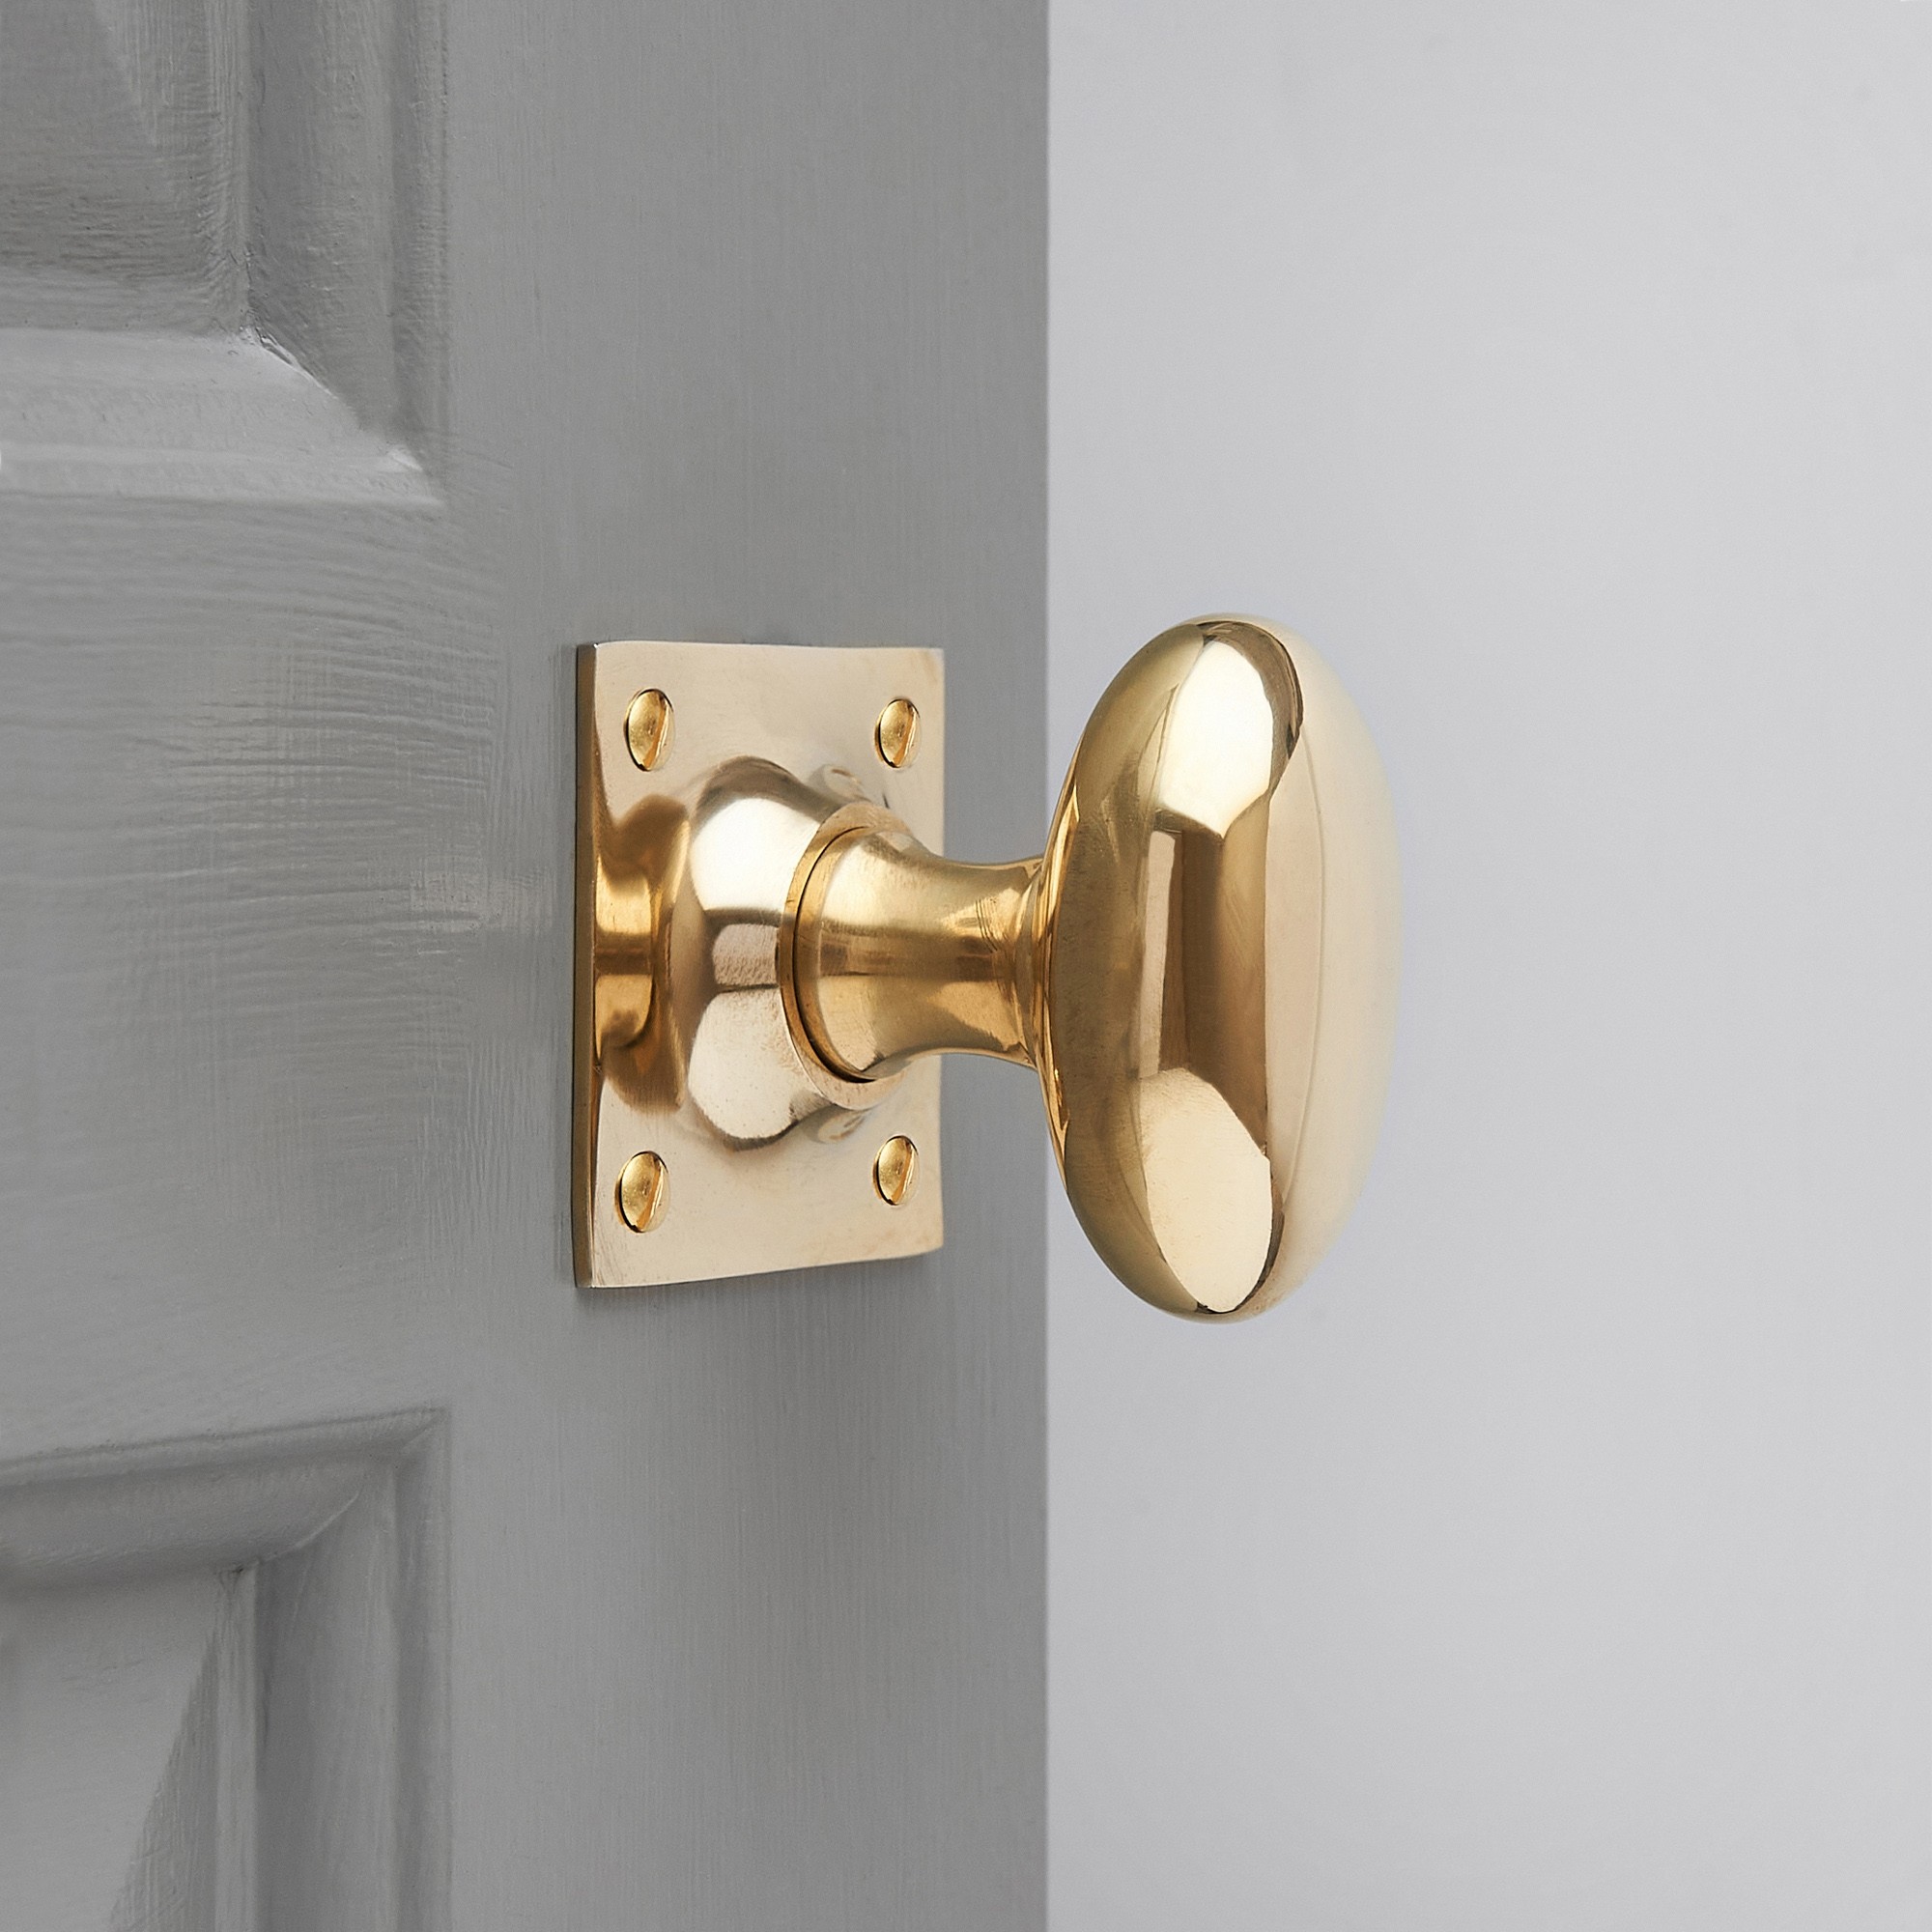 Oval Door Knobs on Square Back Plate (Pair) - Polished Brass